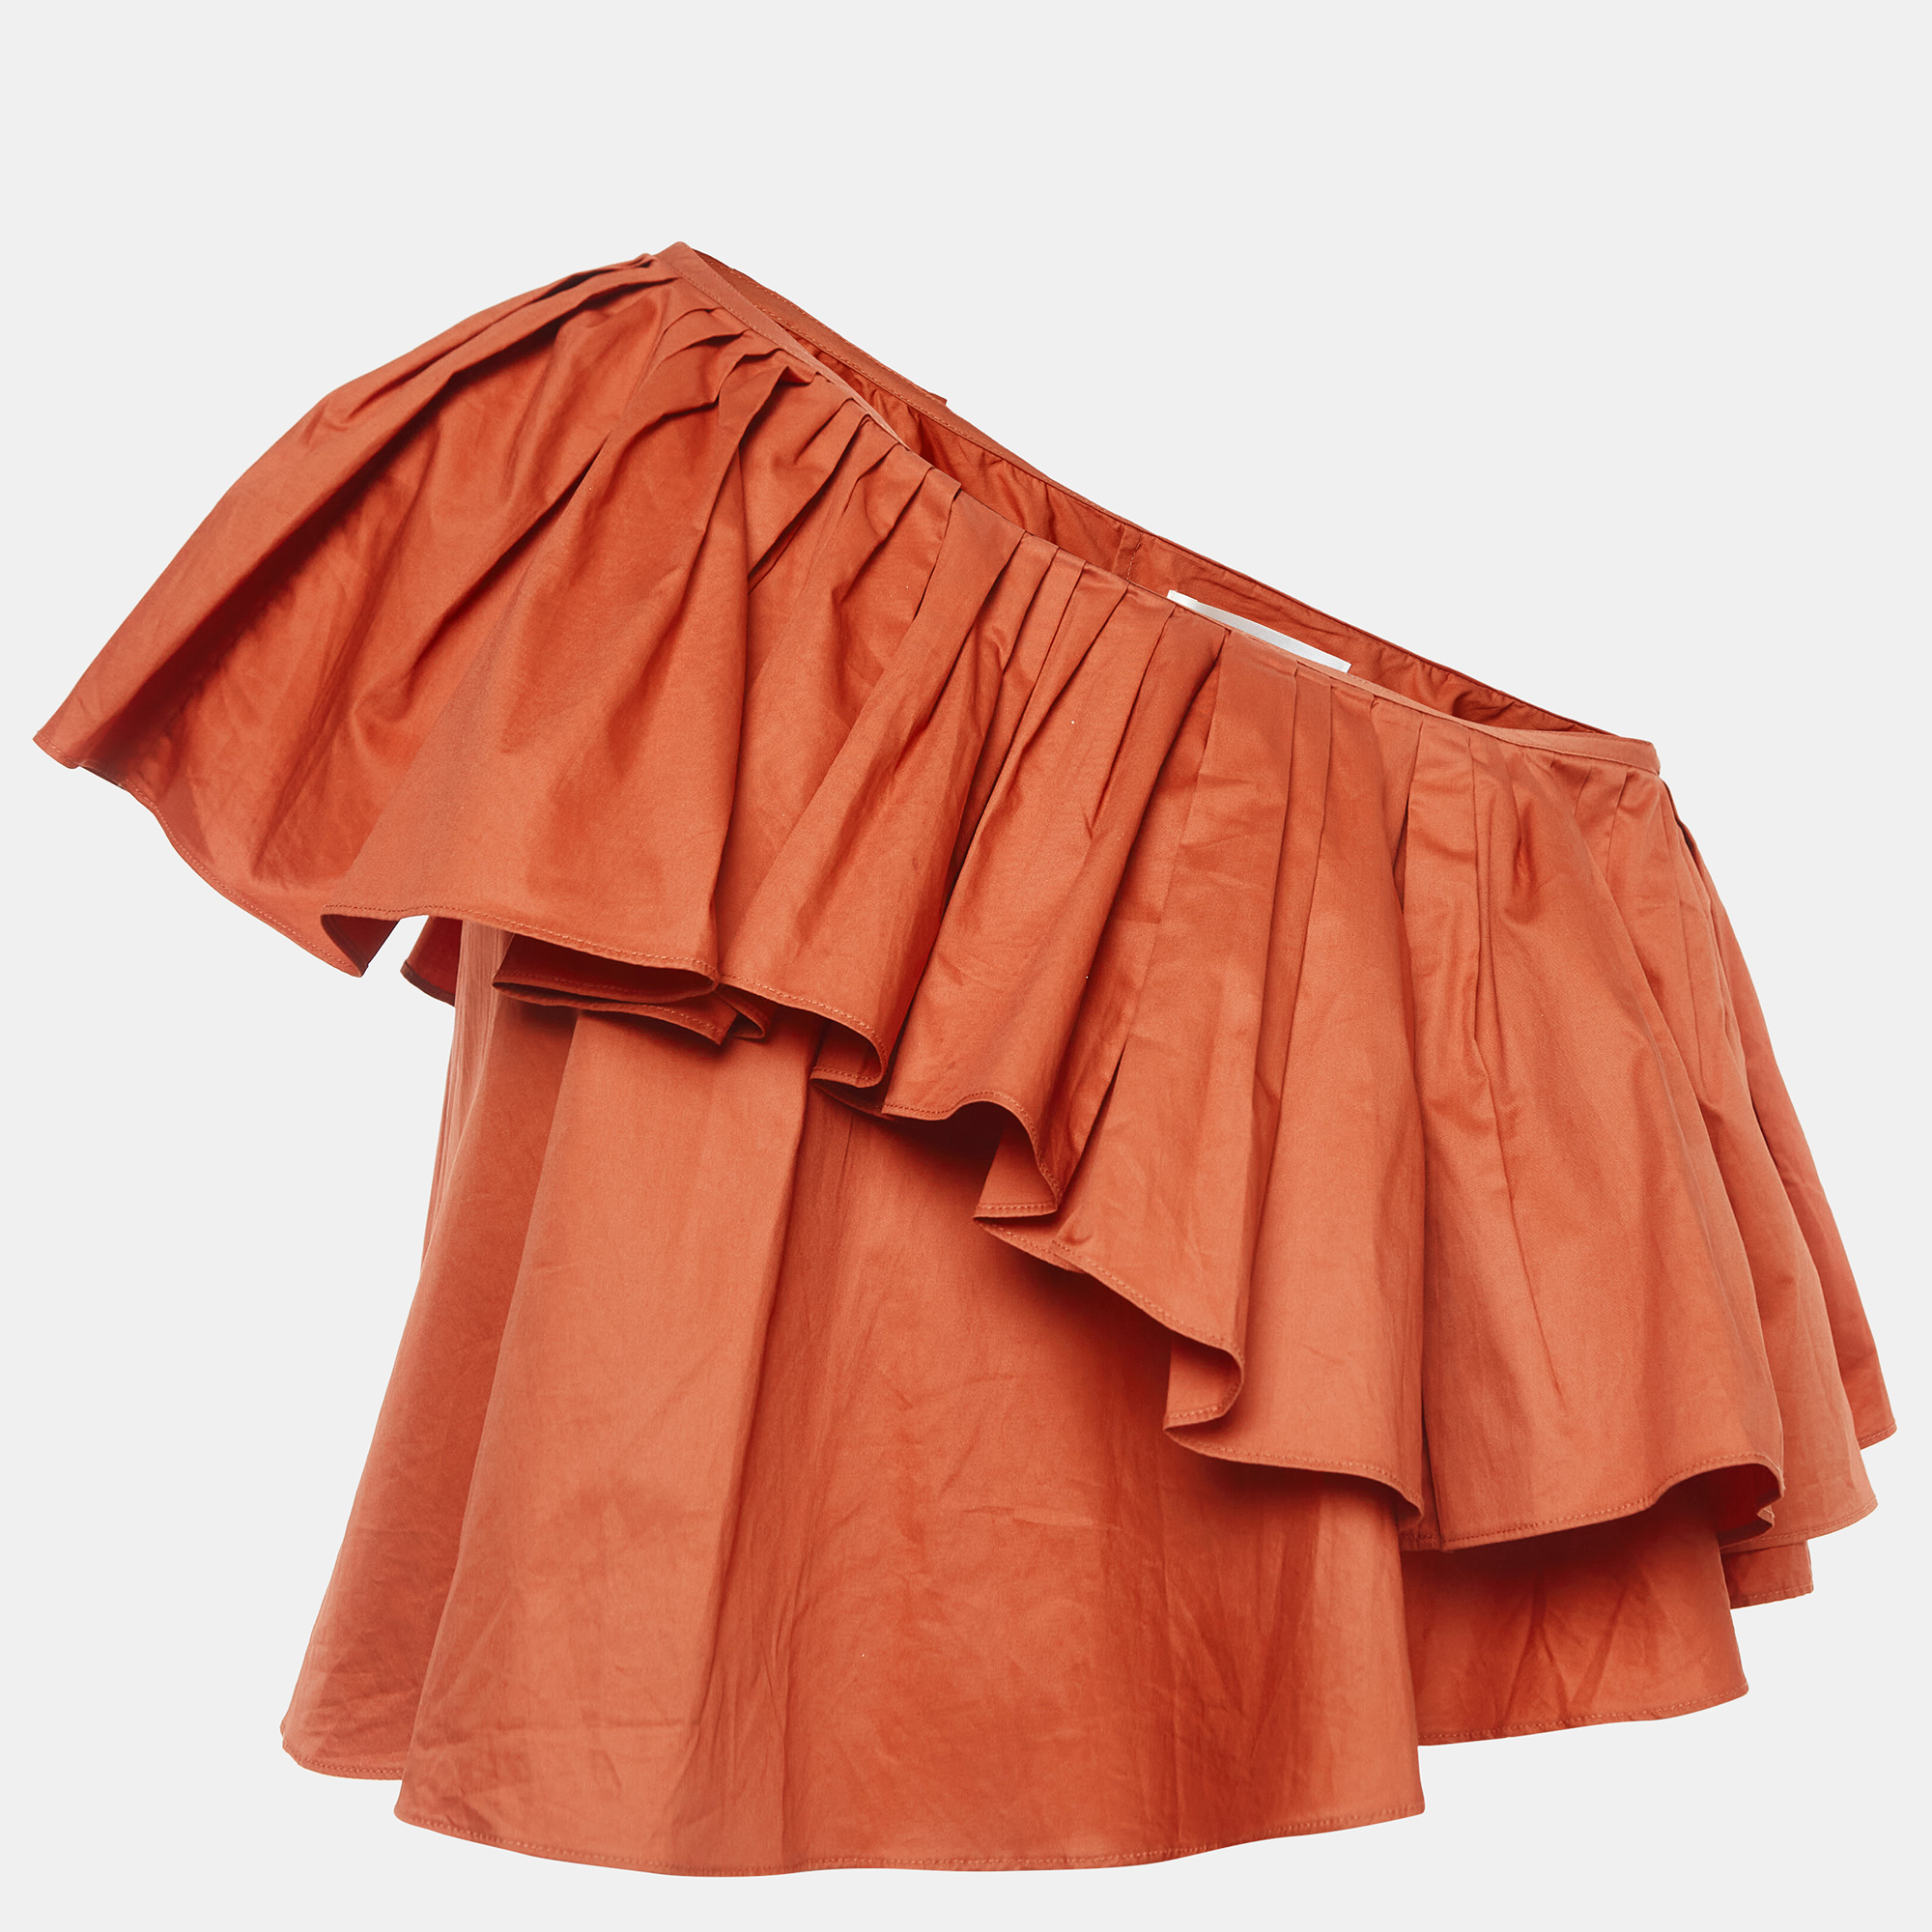 The Ronny Kobo top is a vibrant and stylish piece featuring a single shoulder design with playful ruffles. Made from high quality cotton it offers a comfortable fit and a bold eye catching orange hue making it a perfect choice for a chic and fashionable look.